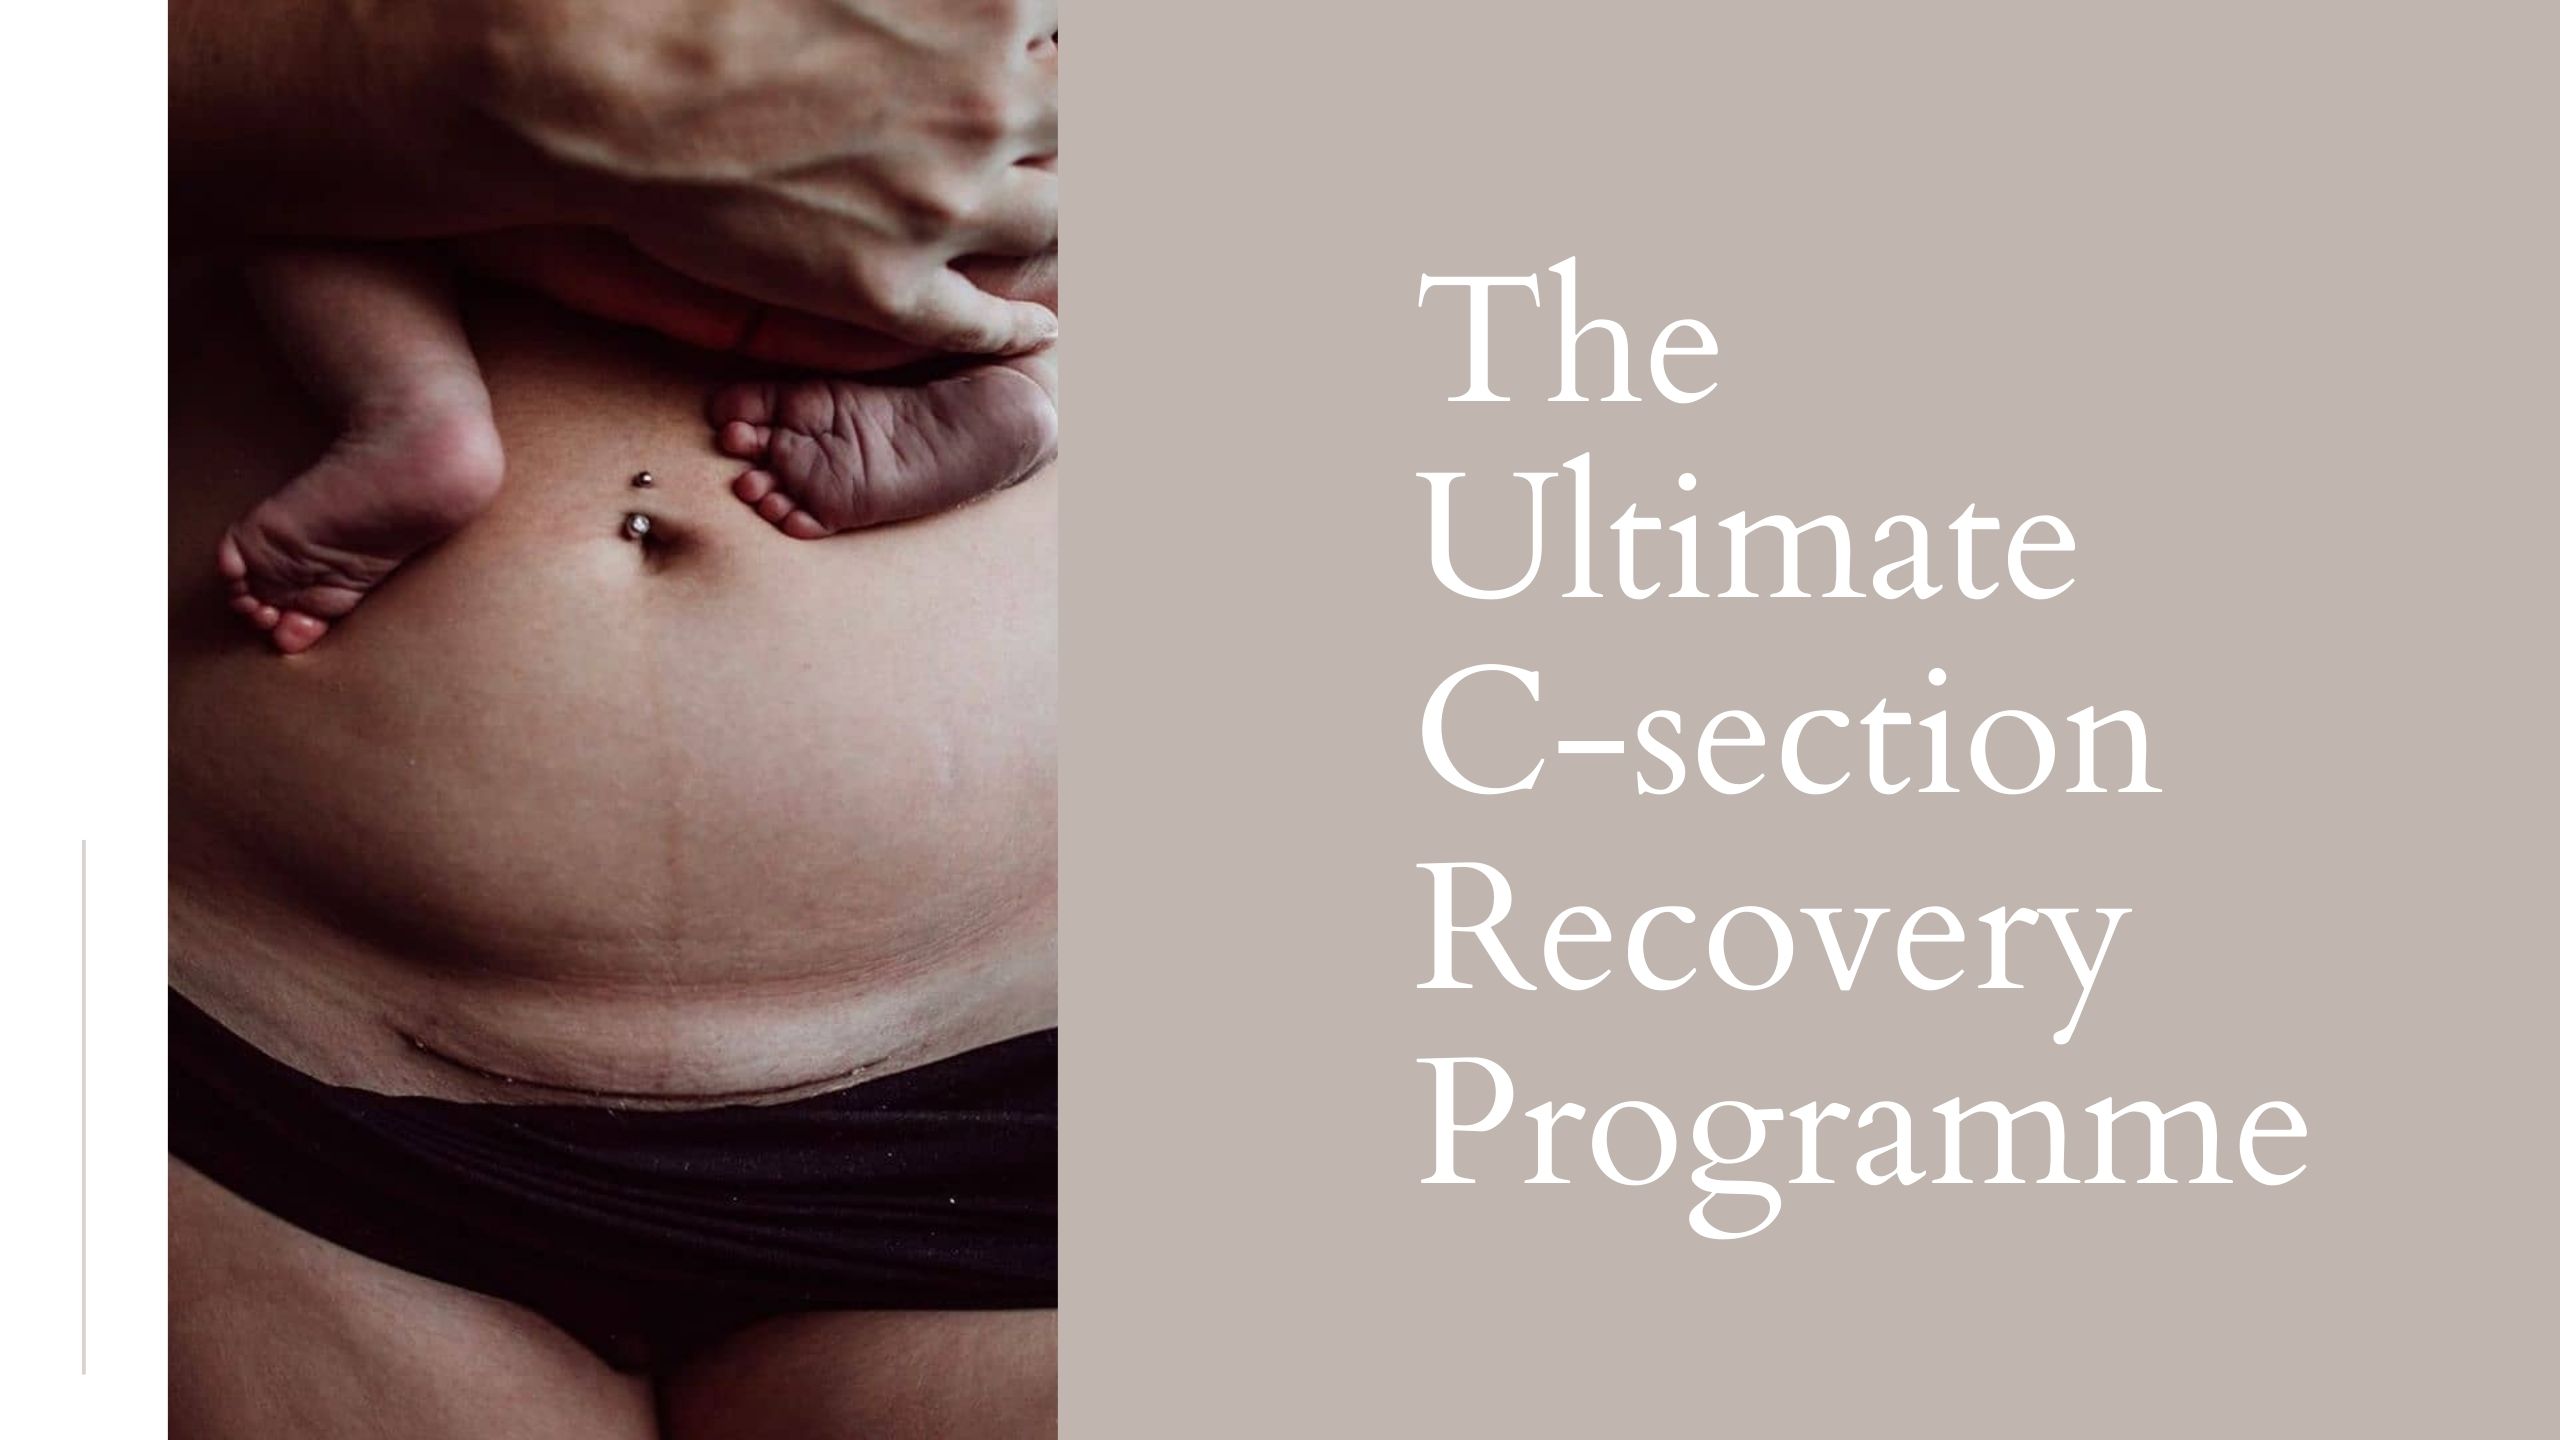 http://www.hannahjohnsontherapies.com/wp-content/uploads/2021/02/The-Ultimate-c-Section-Recovery-programme.jpg